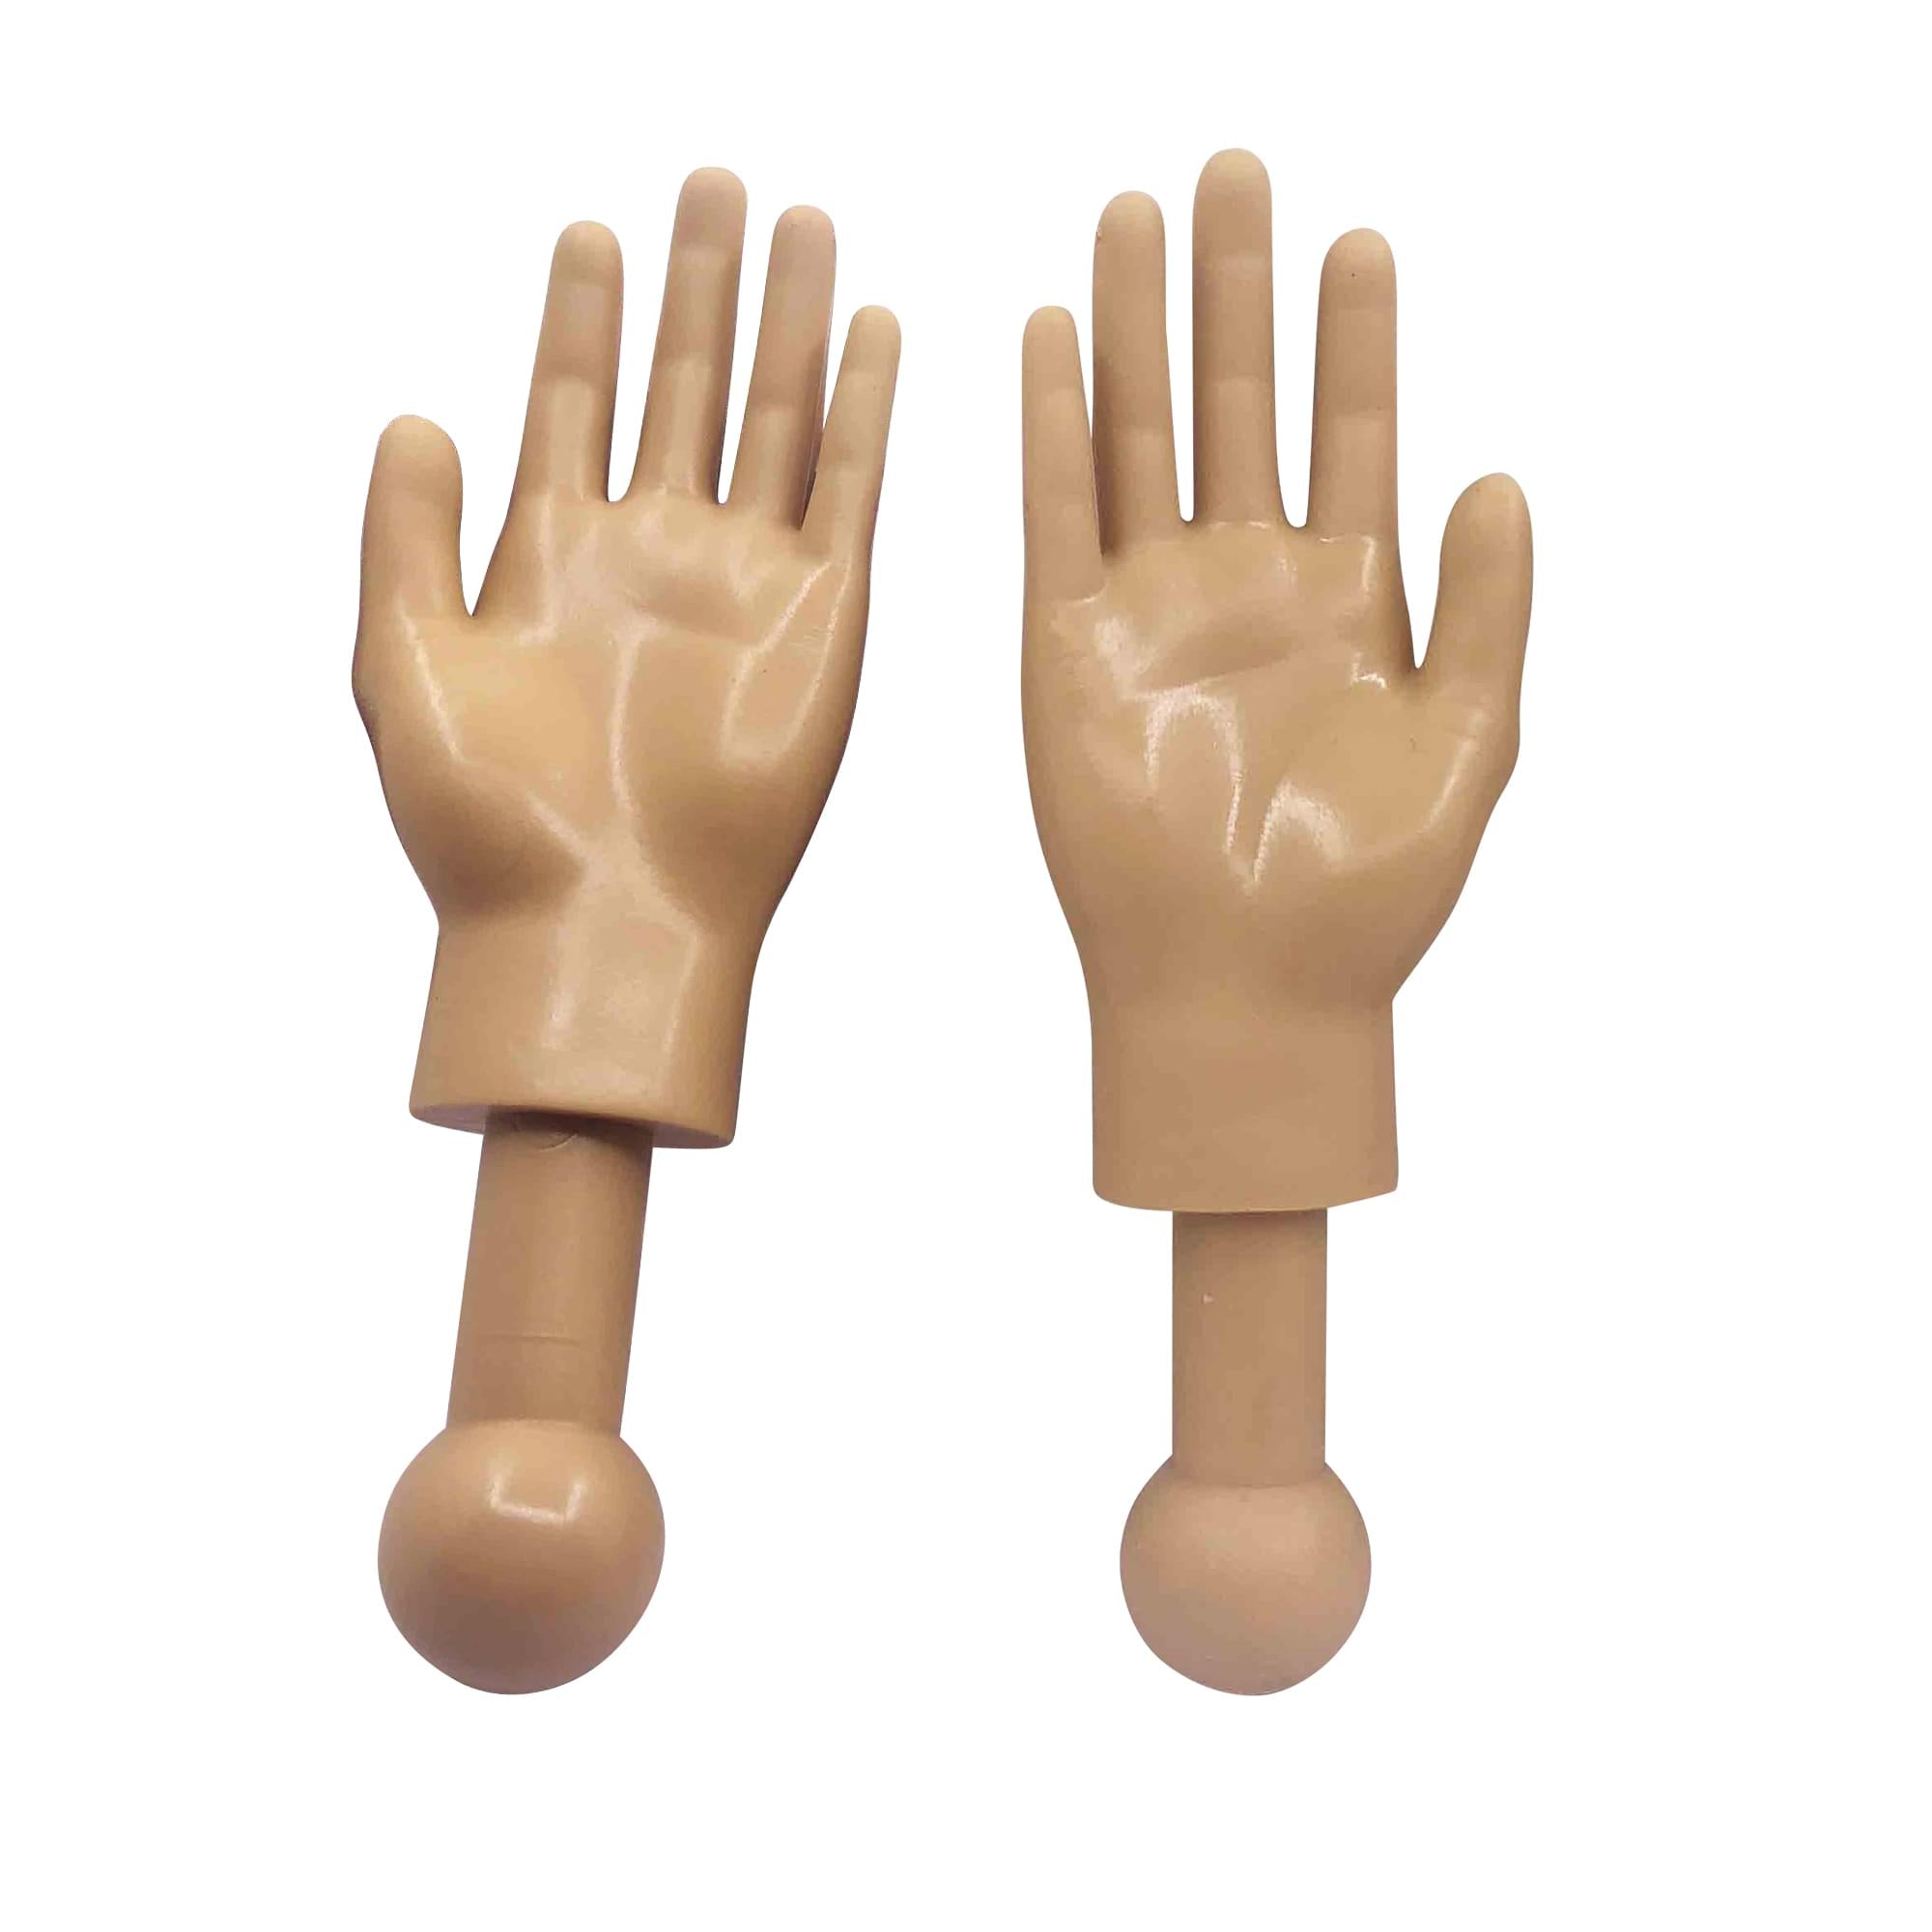 Tiny Hands 4.5 Novelty Toys , Left And Right Hands, Tan